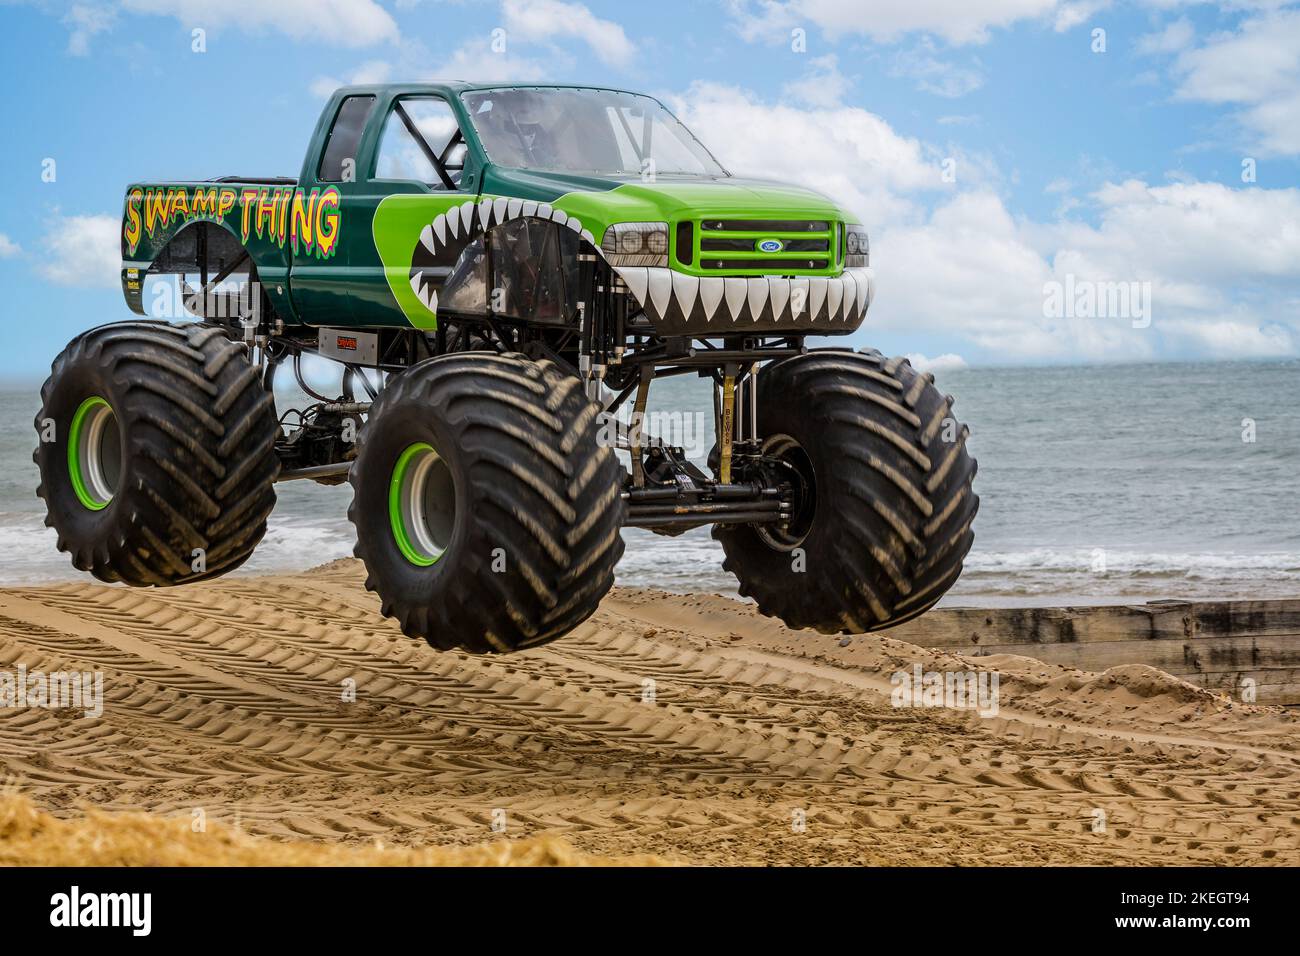 Monster truck airborne at the beach taken at Bournemouth, Dorset, UK on 31 May 2015 Stock Photo